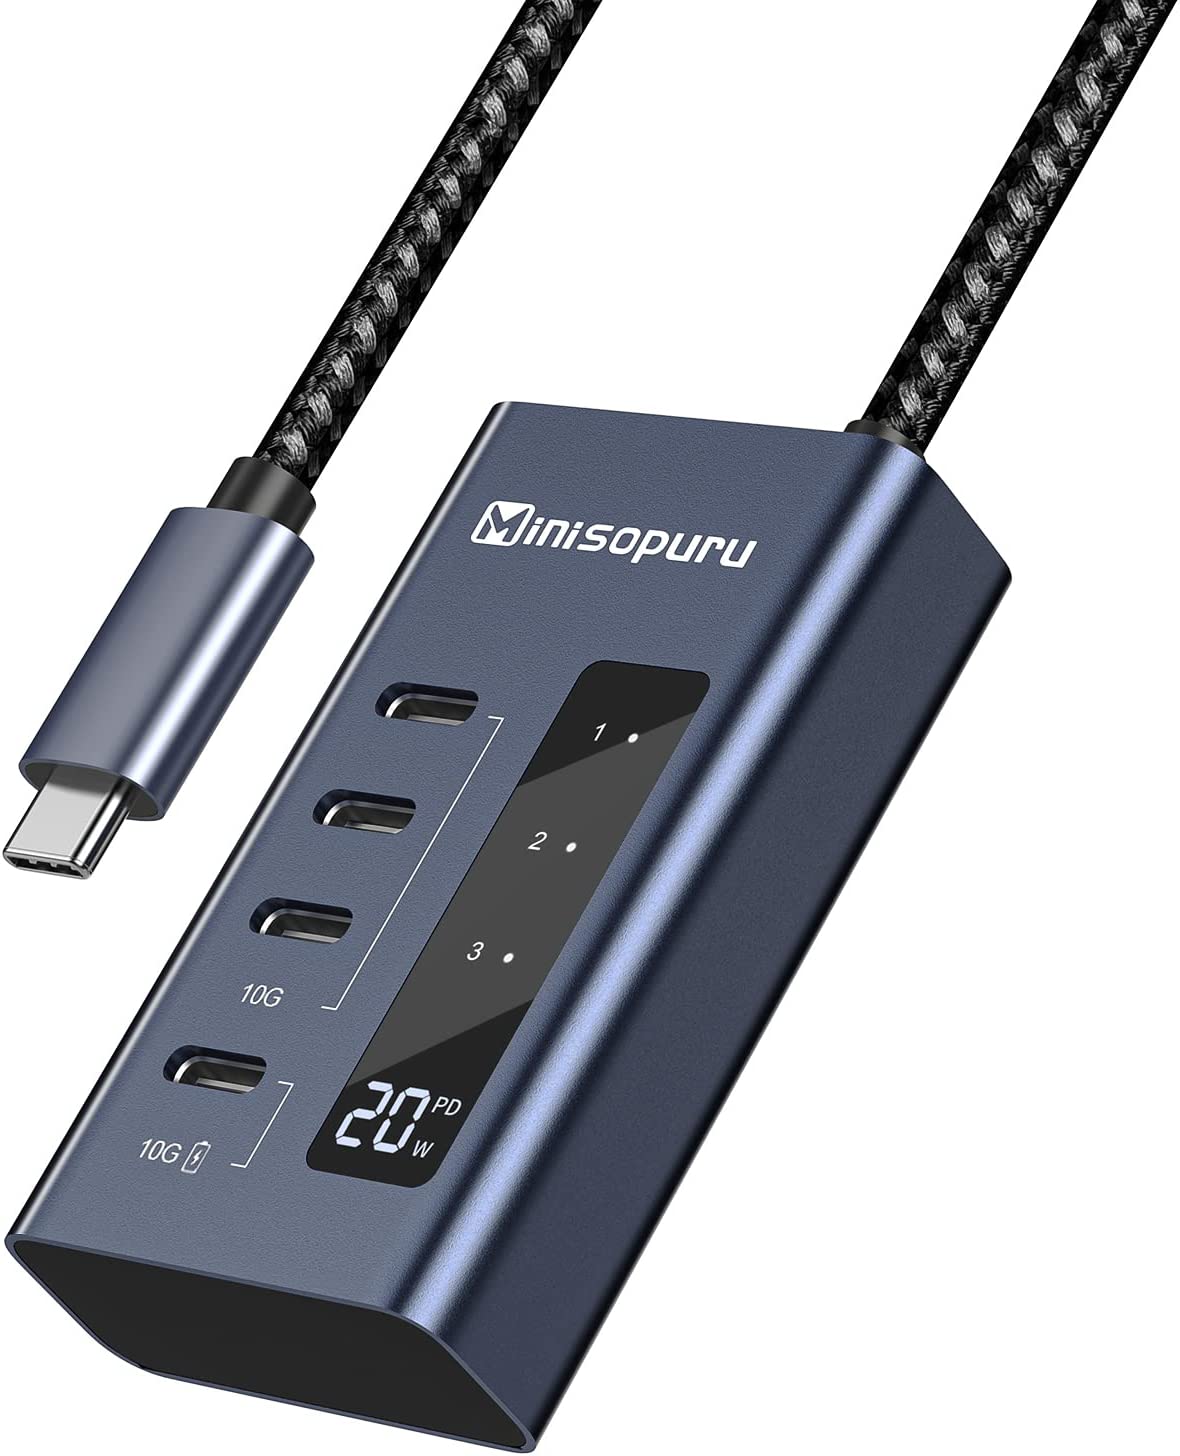 Buy USB C Hub at Best Prices Online for Macbook